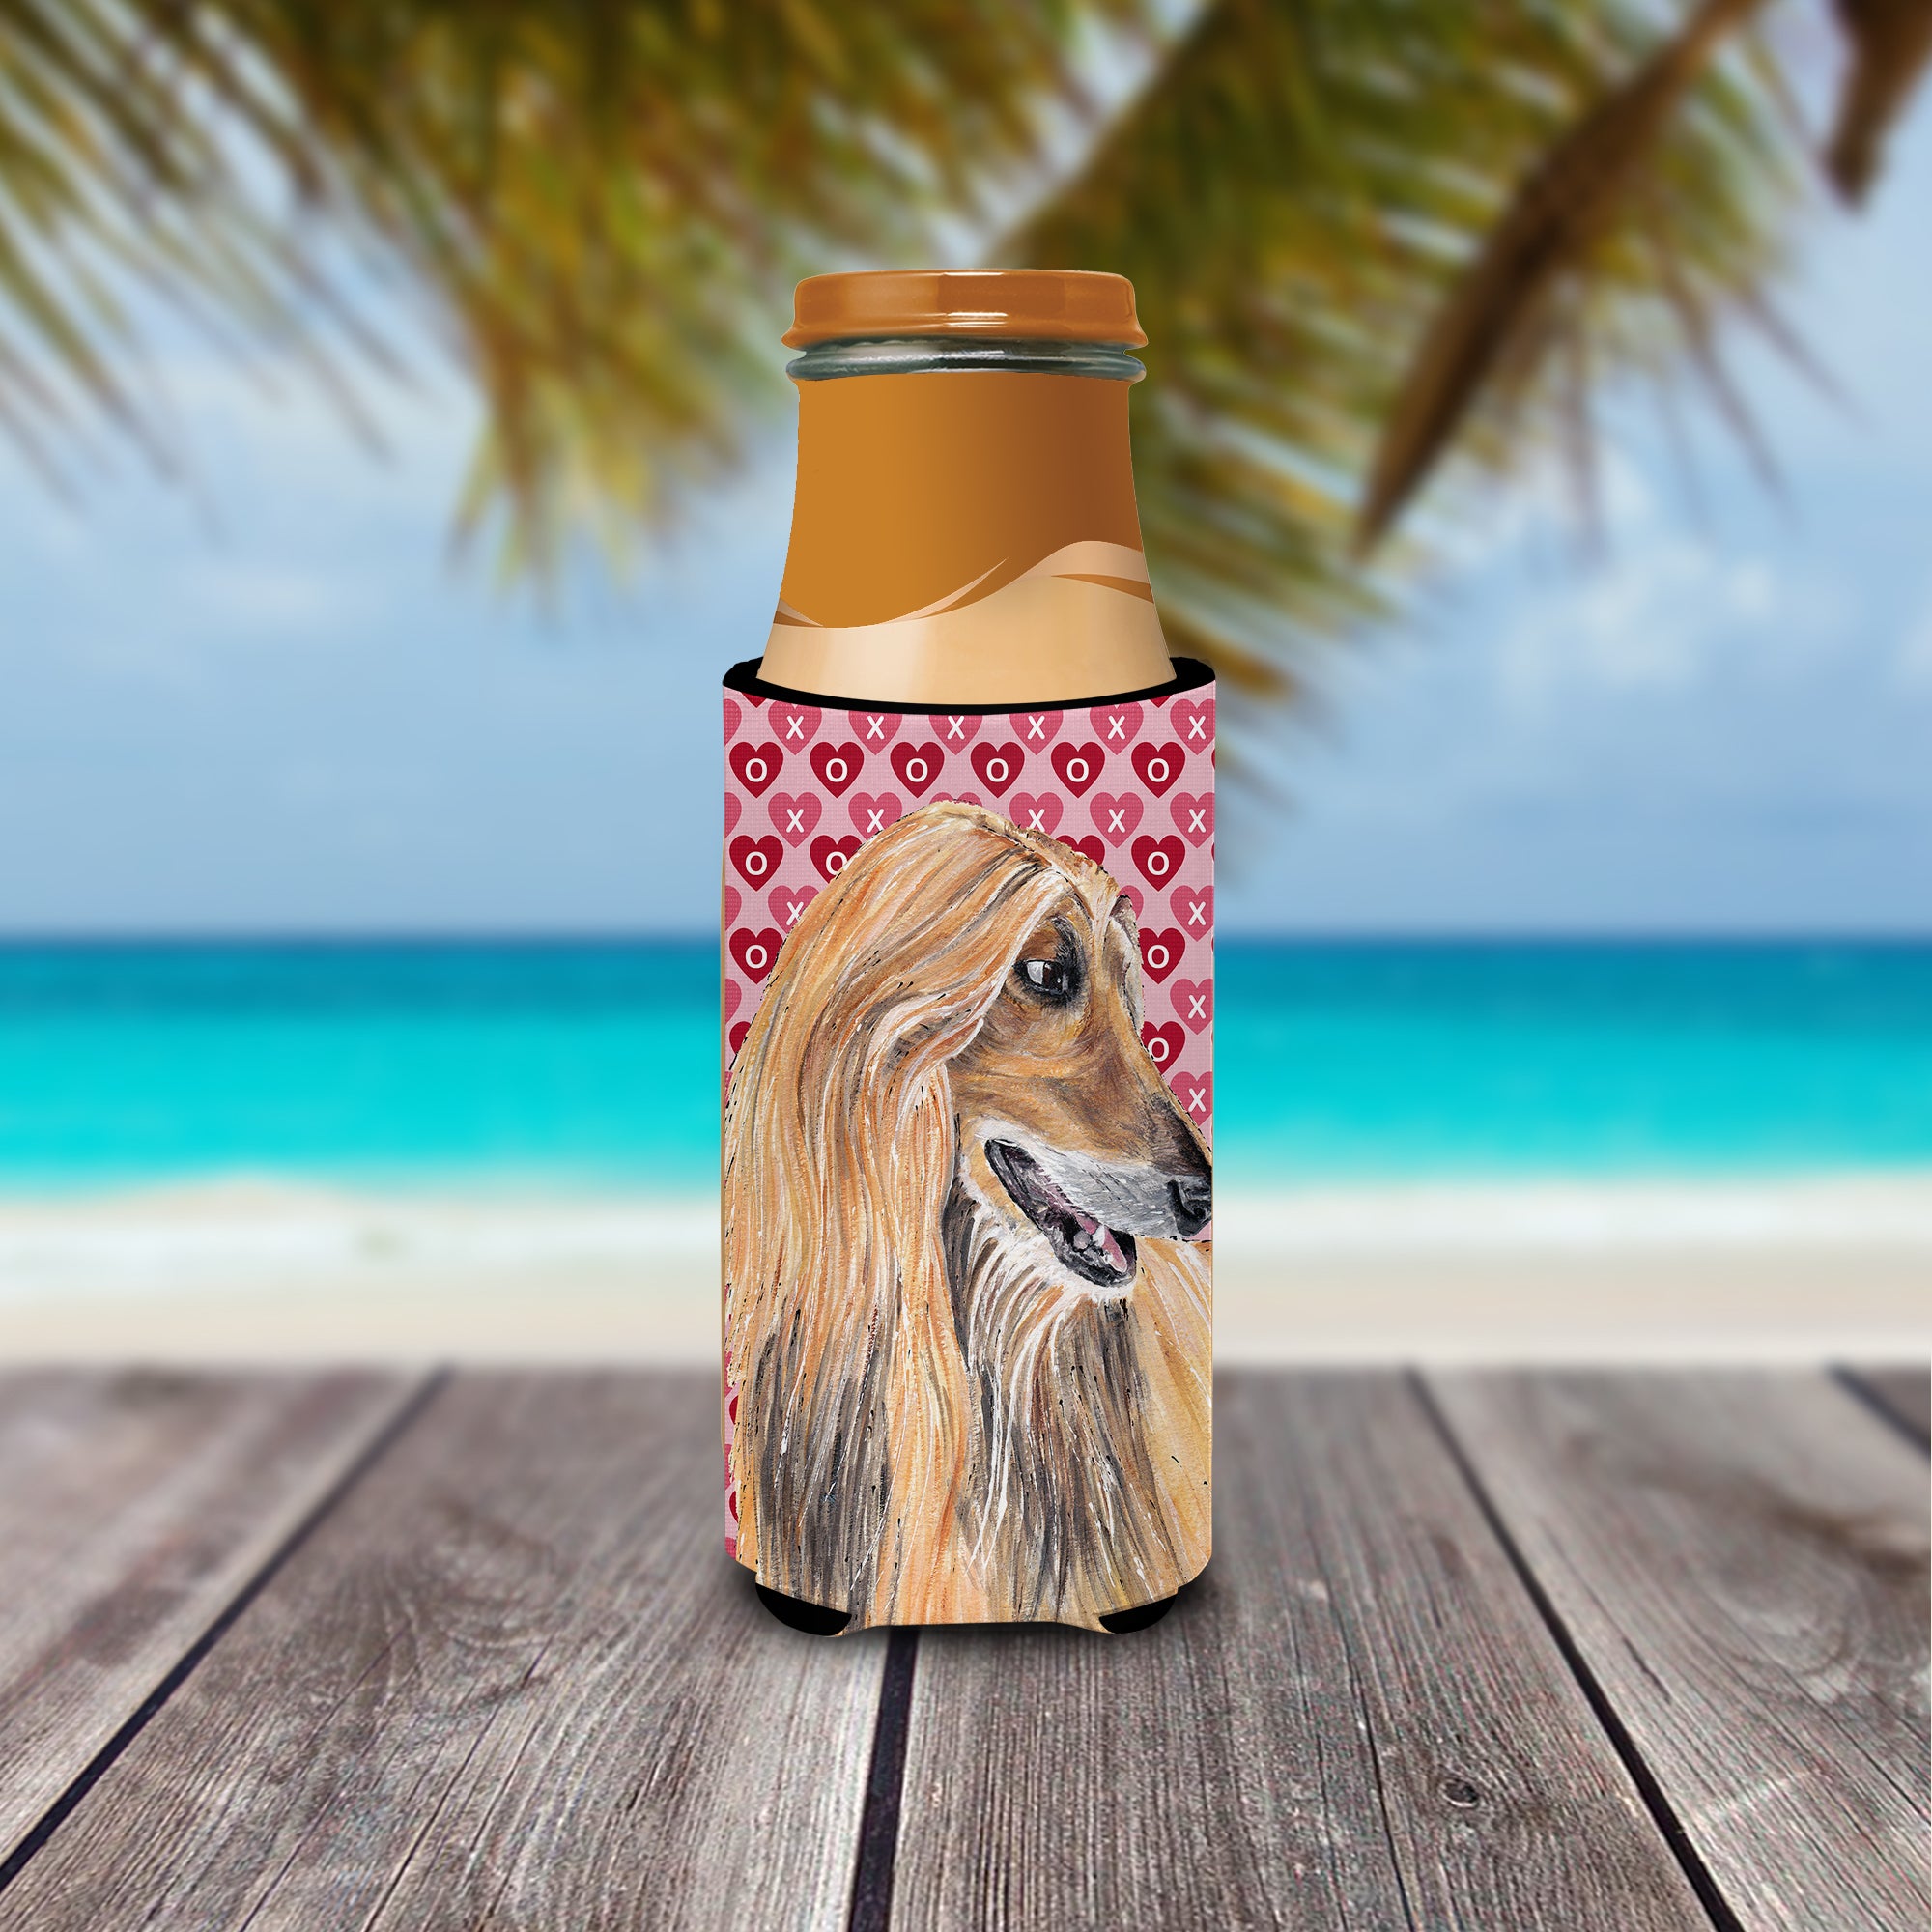 Afghan Hound Hearts Love and Valentine's Day Ultra Beverage Insulators for slim cans SC9503MUK.